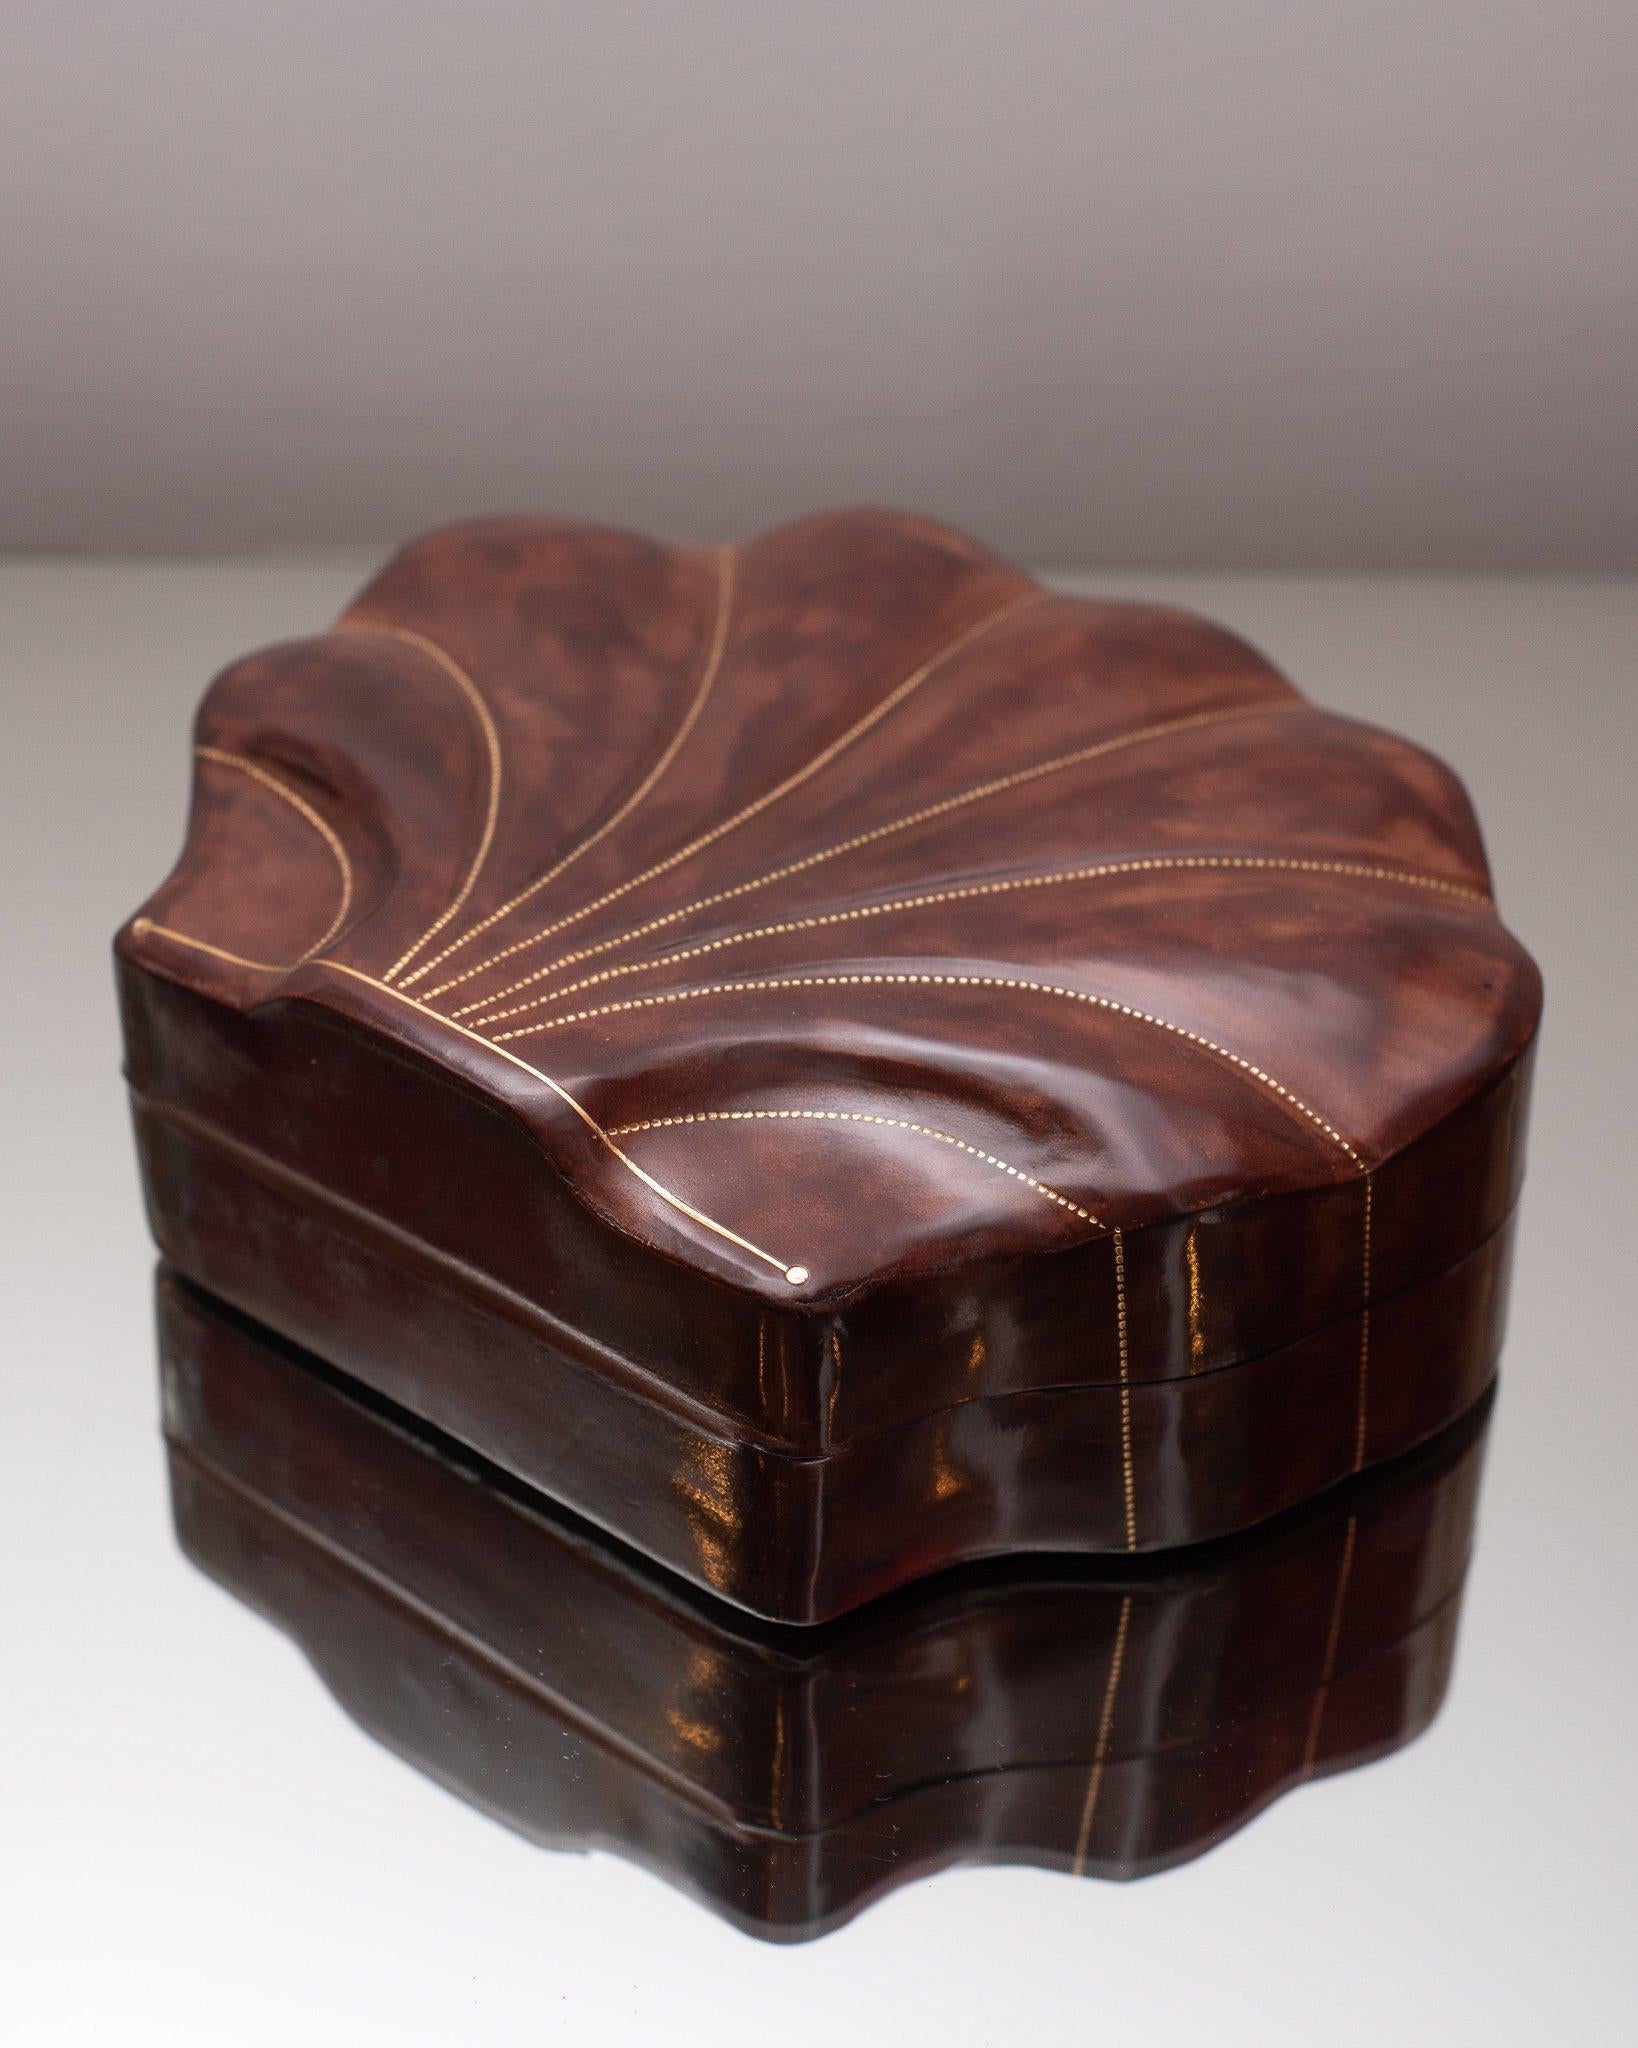 Sourced n a trip to Italy, these sophisticated hand-made leather boxes come from Florence. Florence is known for working with the highest quality of leathers. This large burgundy leather shell box is uniquely hand crafted and finished with gold trim